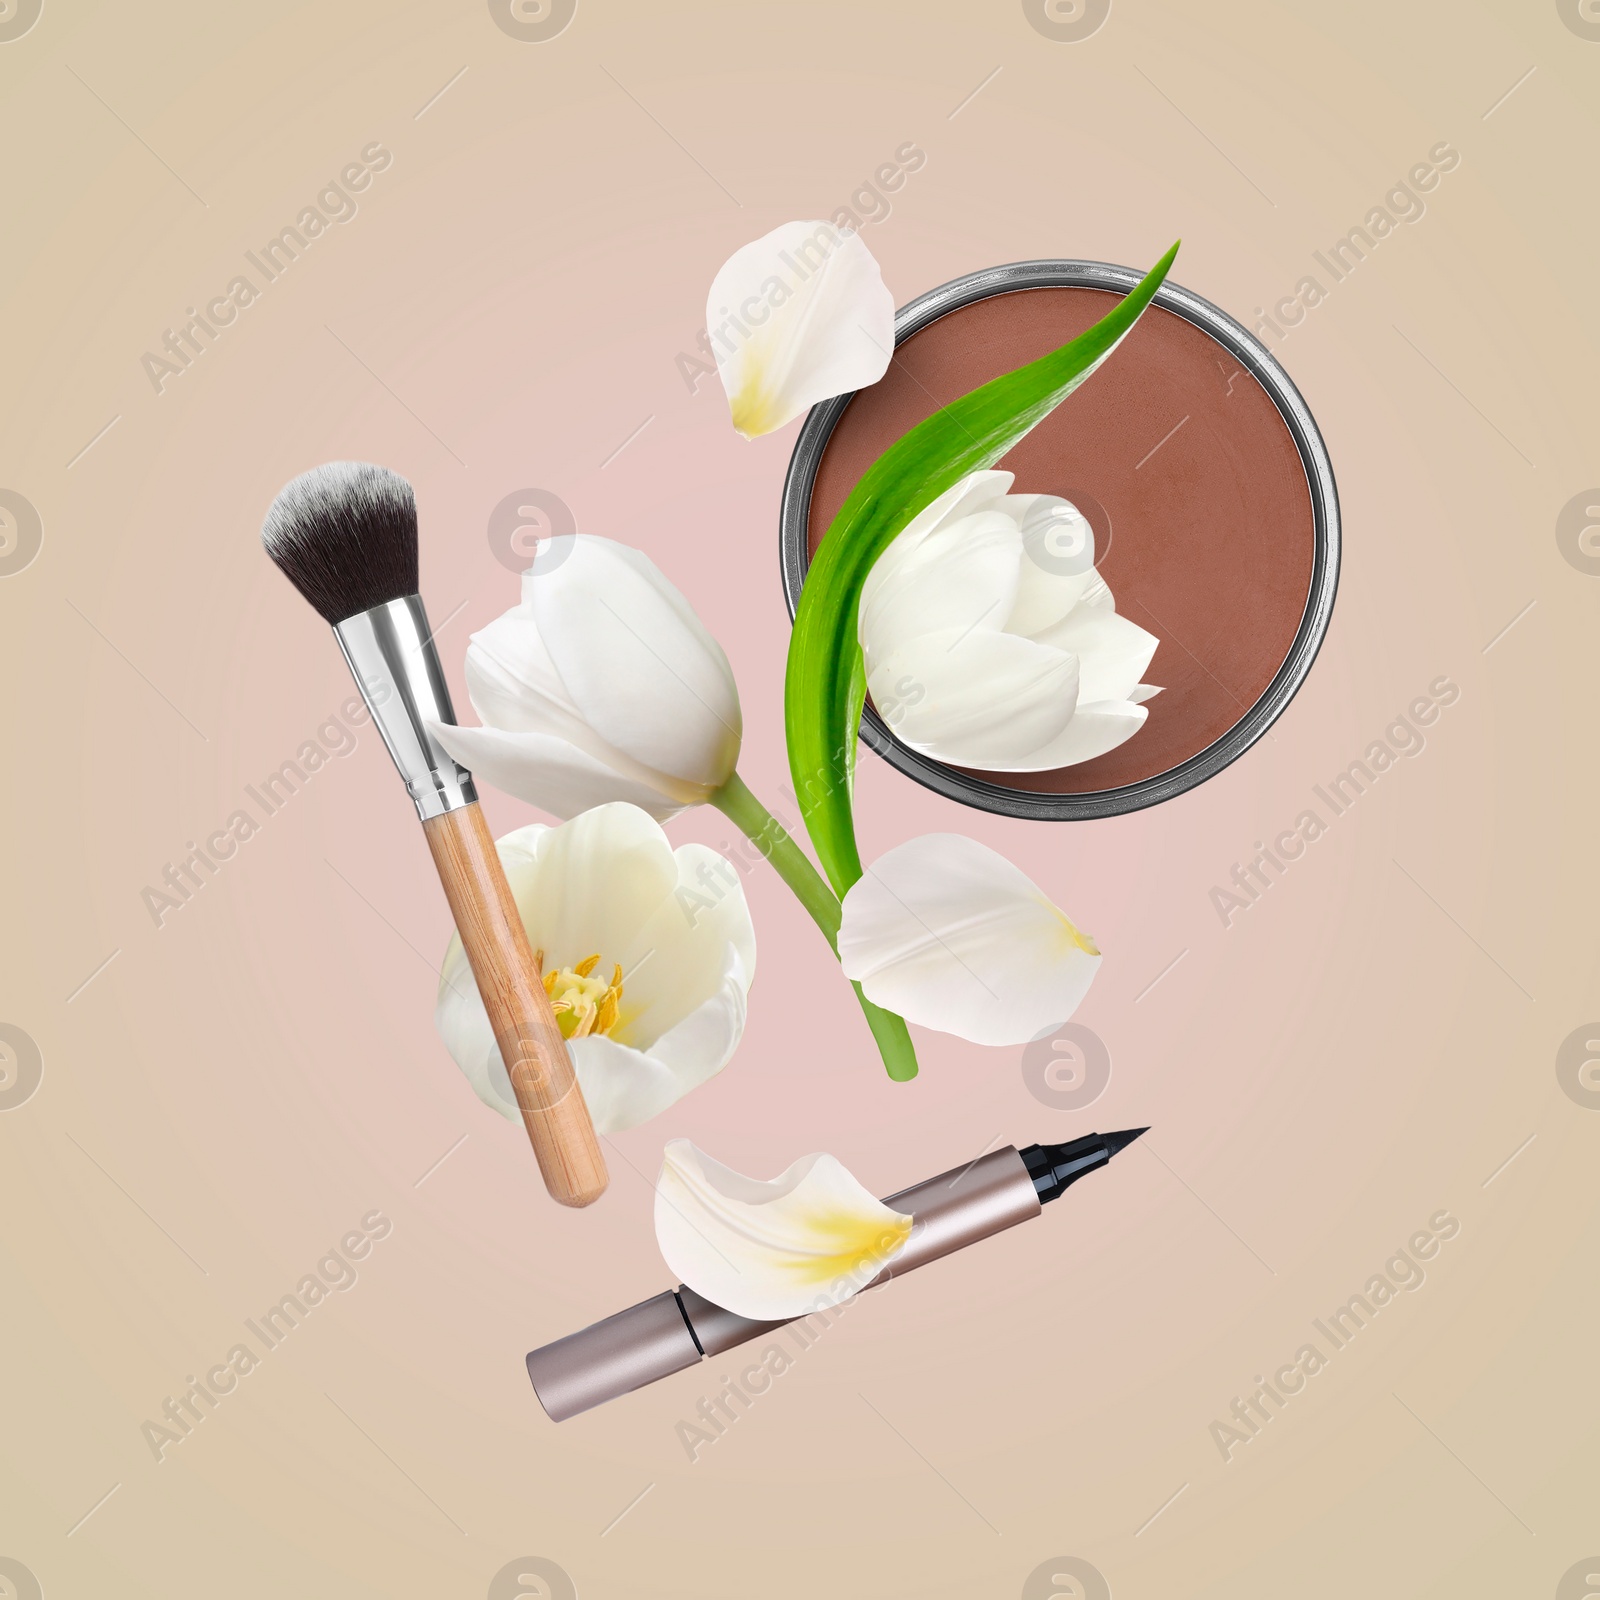 Image of Spring flowers and makeup products in air on dark beige background